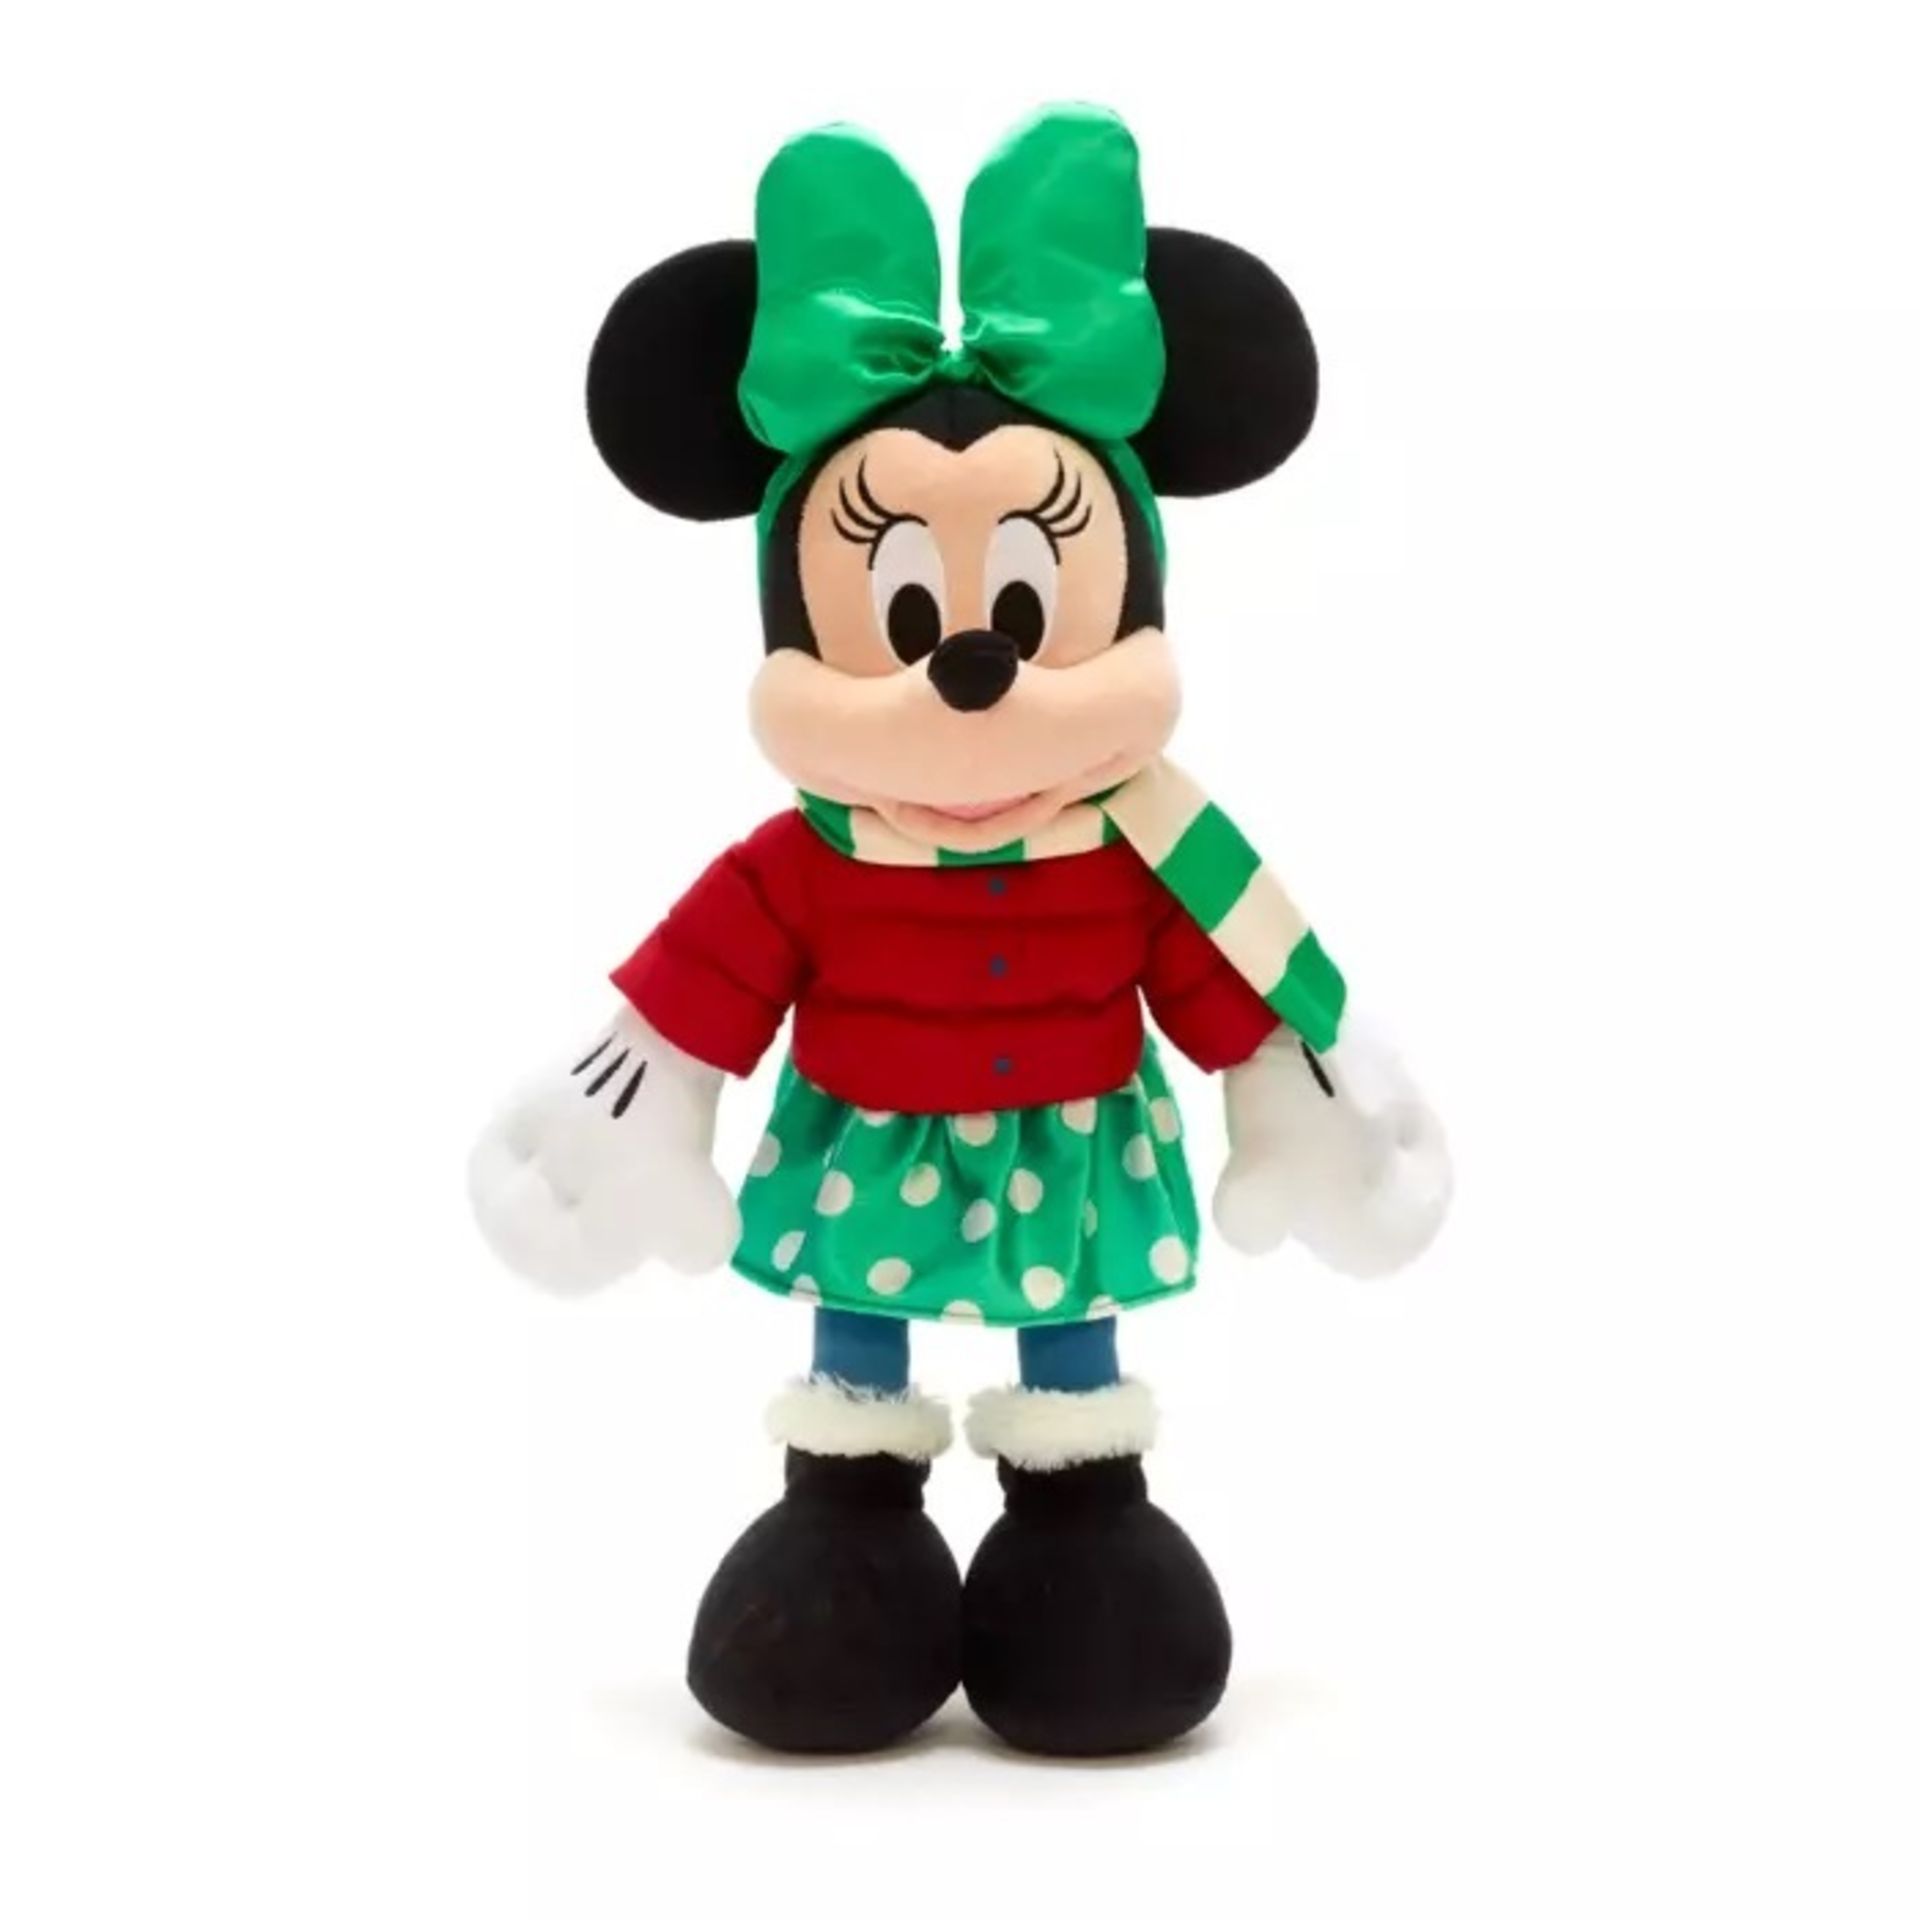 RRP £21.00 BRAND NEW STOCK 0 Disney Minnie Mouse Holiday Cheer Medium Soft Toy